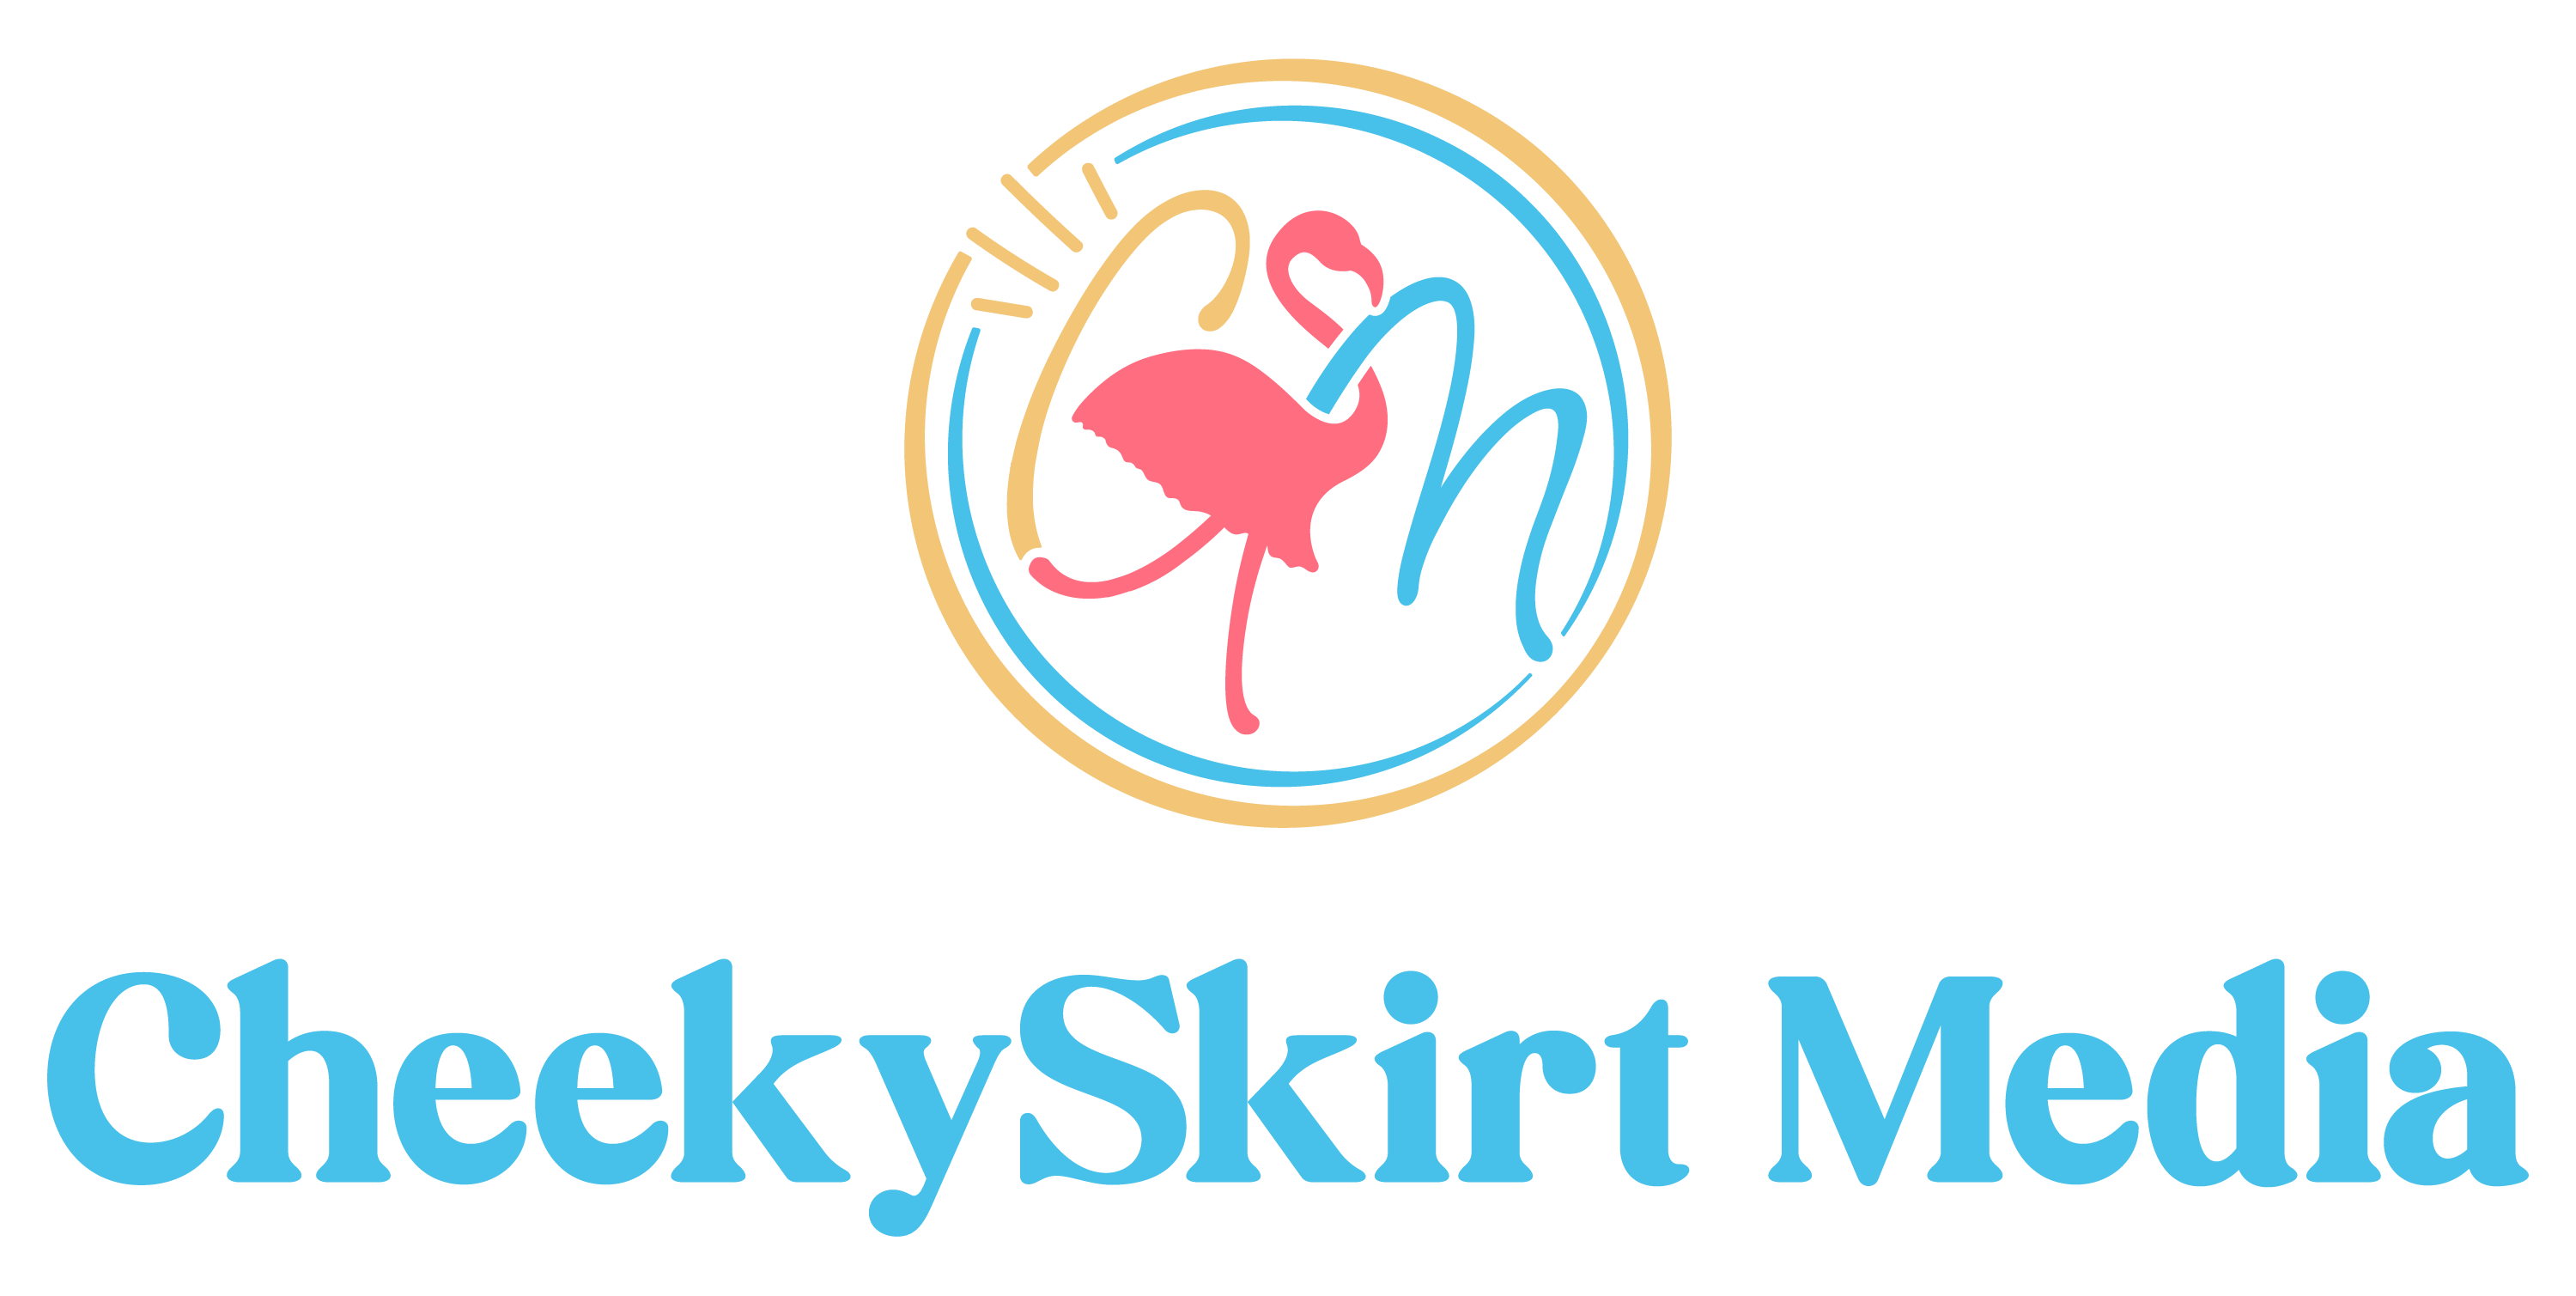 CheekySkirt Media - A Public Relations Agency for Busy Business Owners